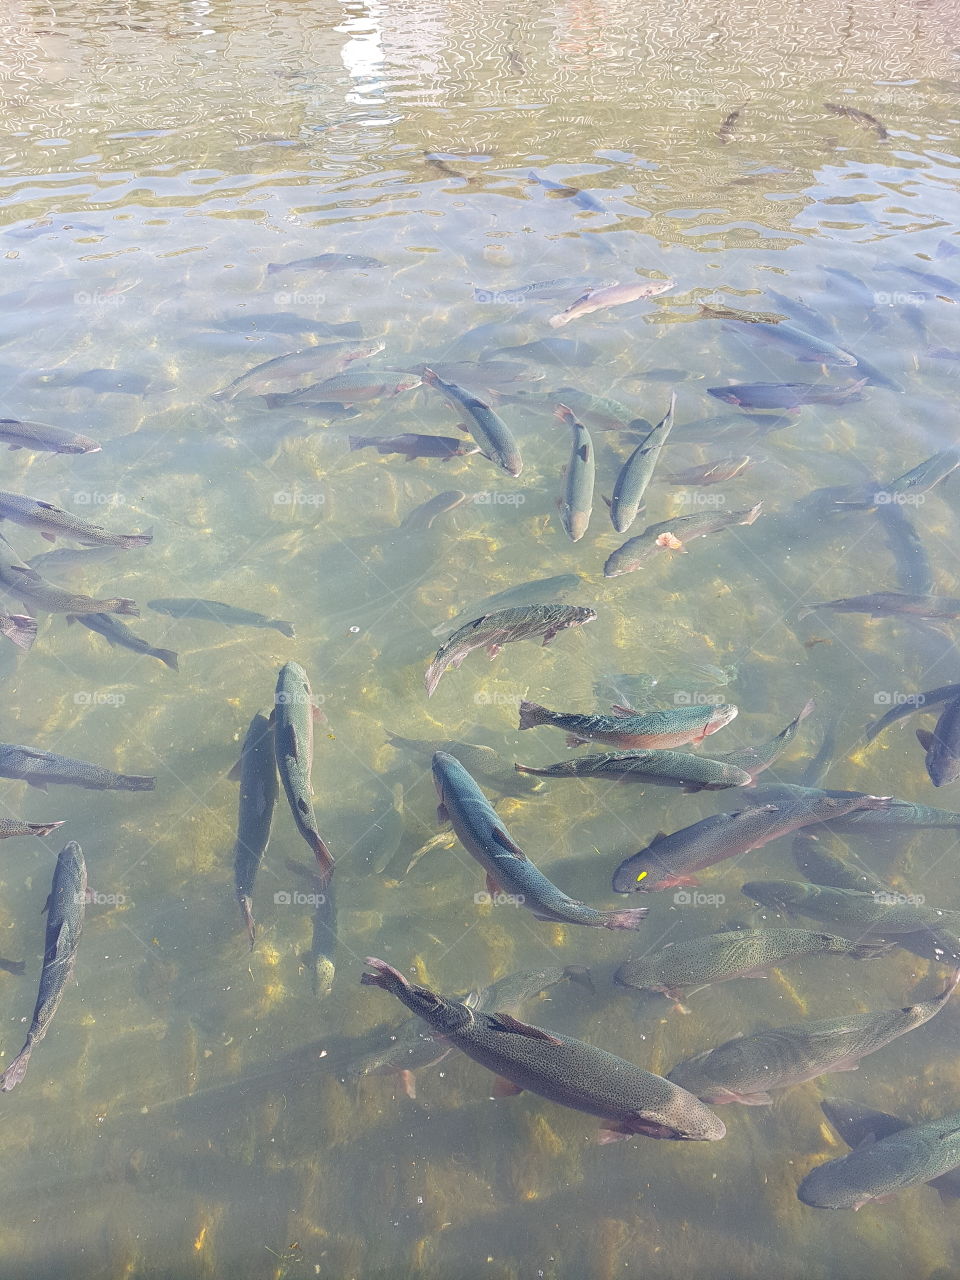 A school of trout lazily swim through sunny water.